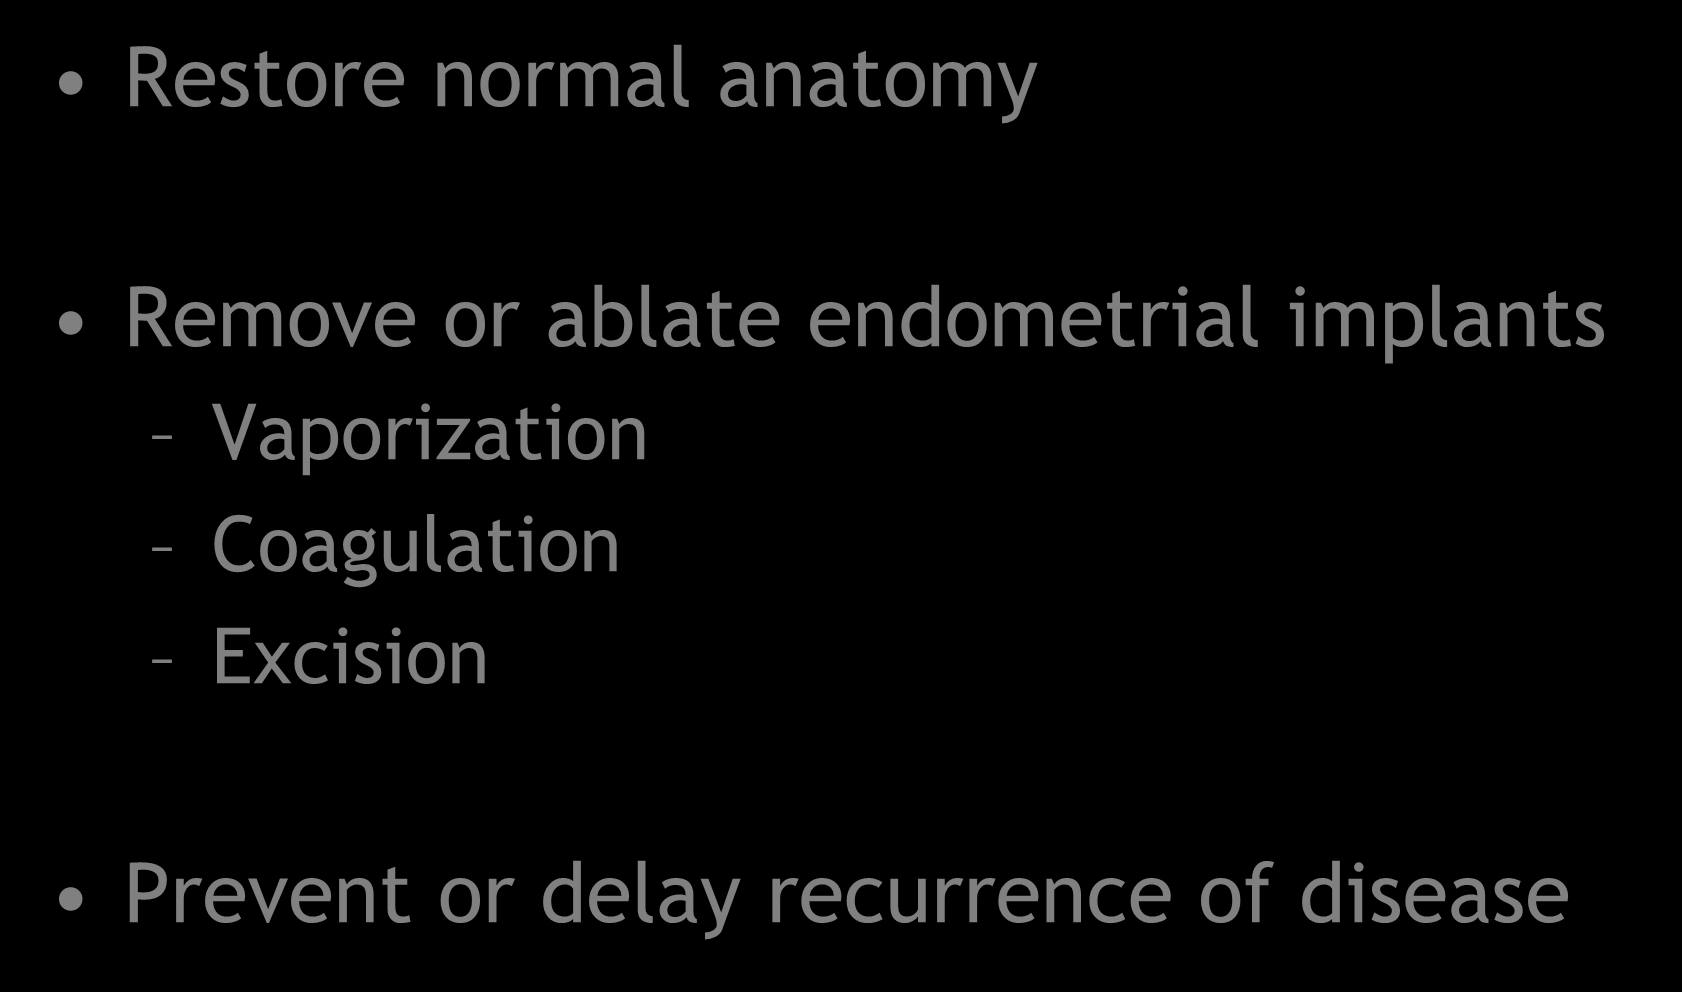 Treatment Objectives Restore normal anatomy Remove or ablate endometrial